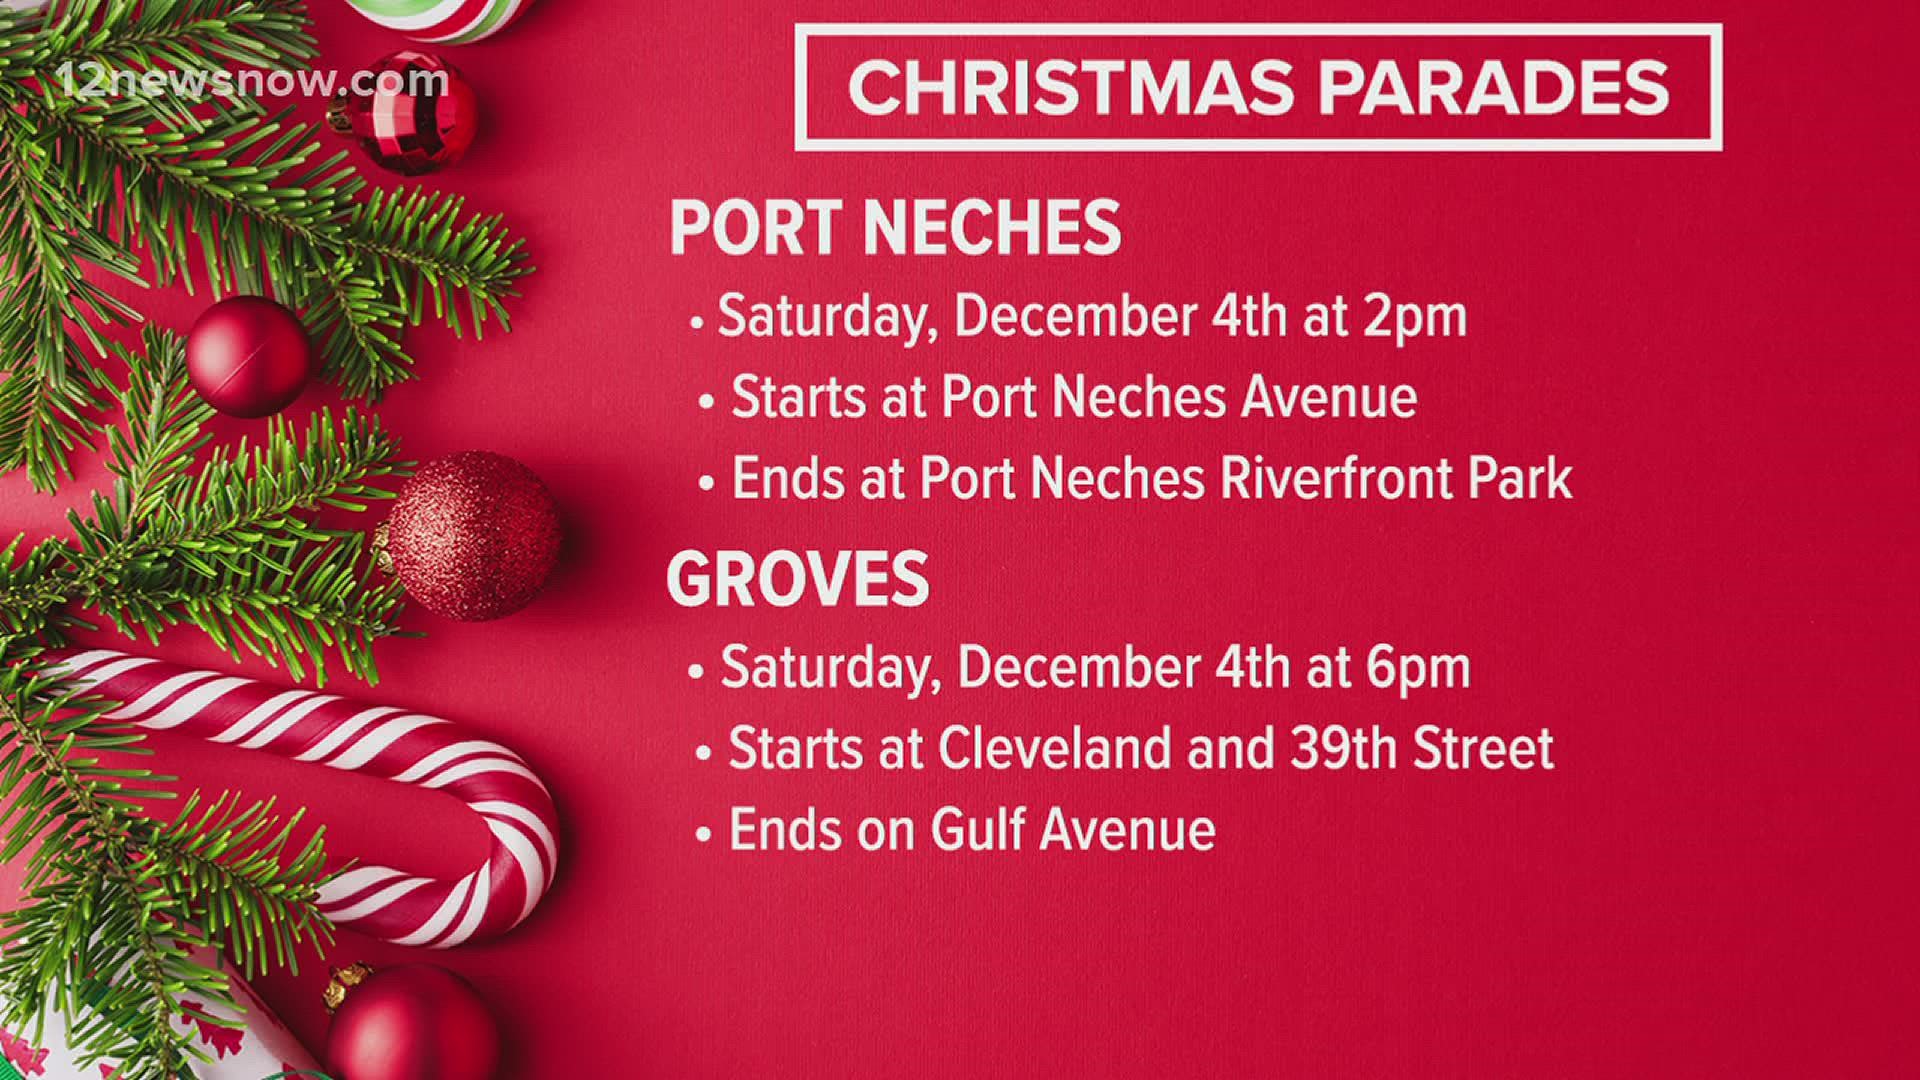 There will be a parade in Port Neches and in Groves.